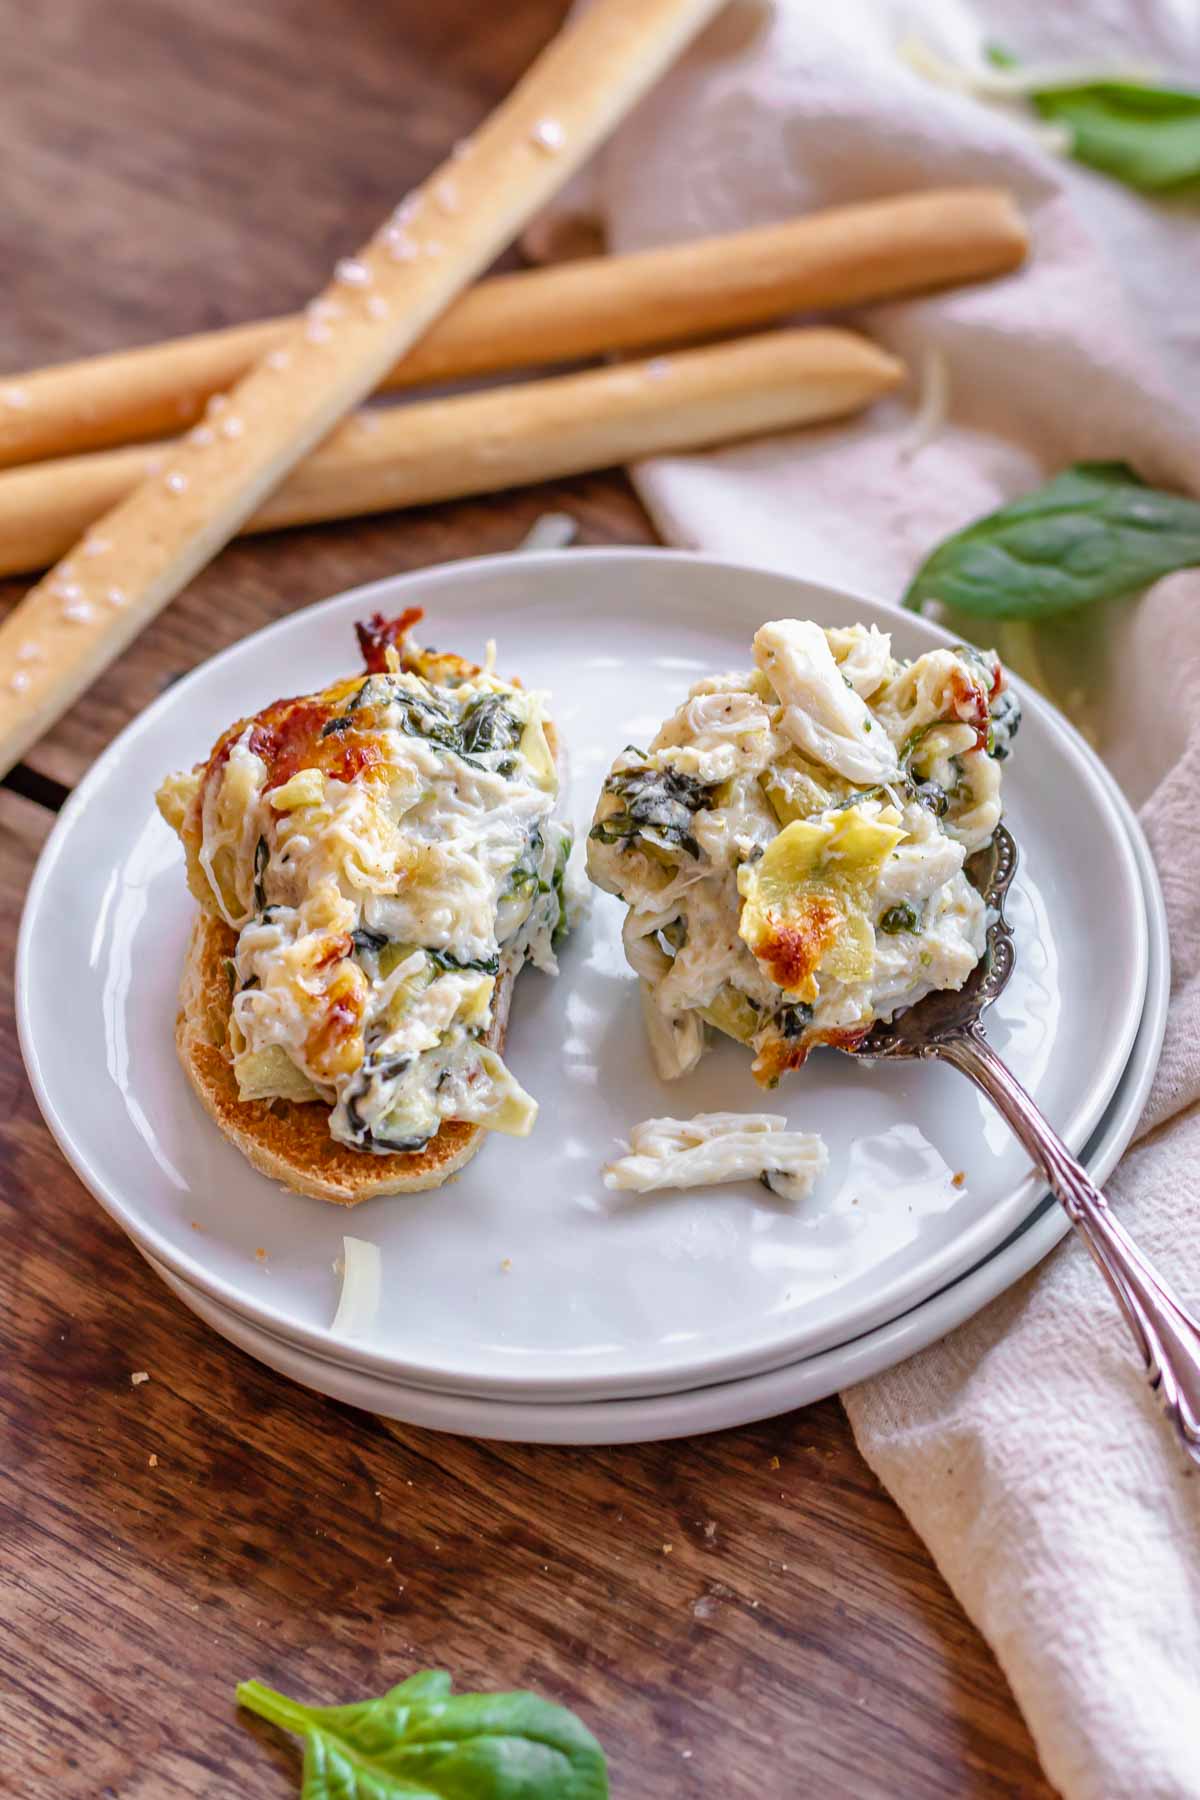 A spoonful of spinach artichoke crab dip on a baguette and some on a spoon resting on a plate.